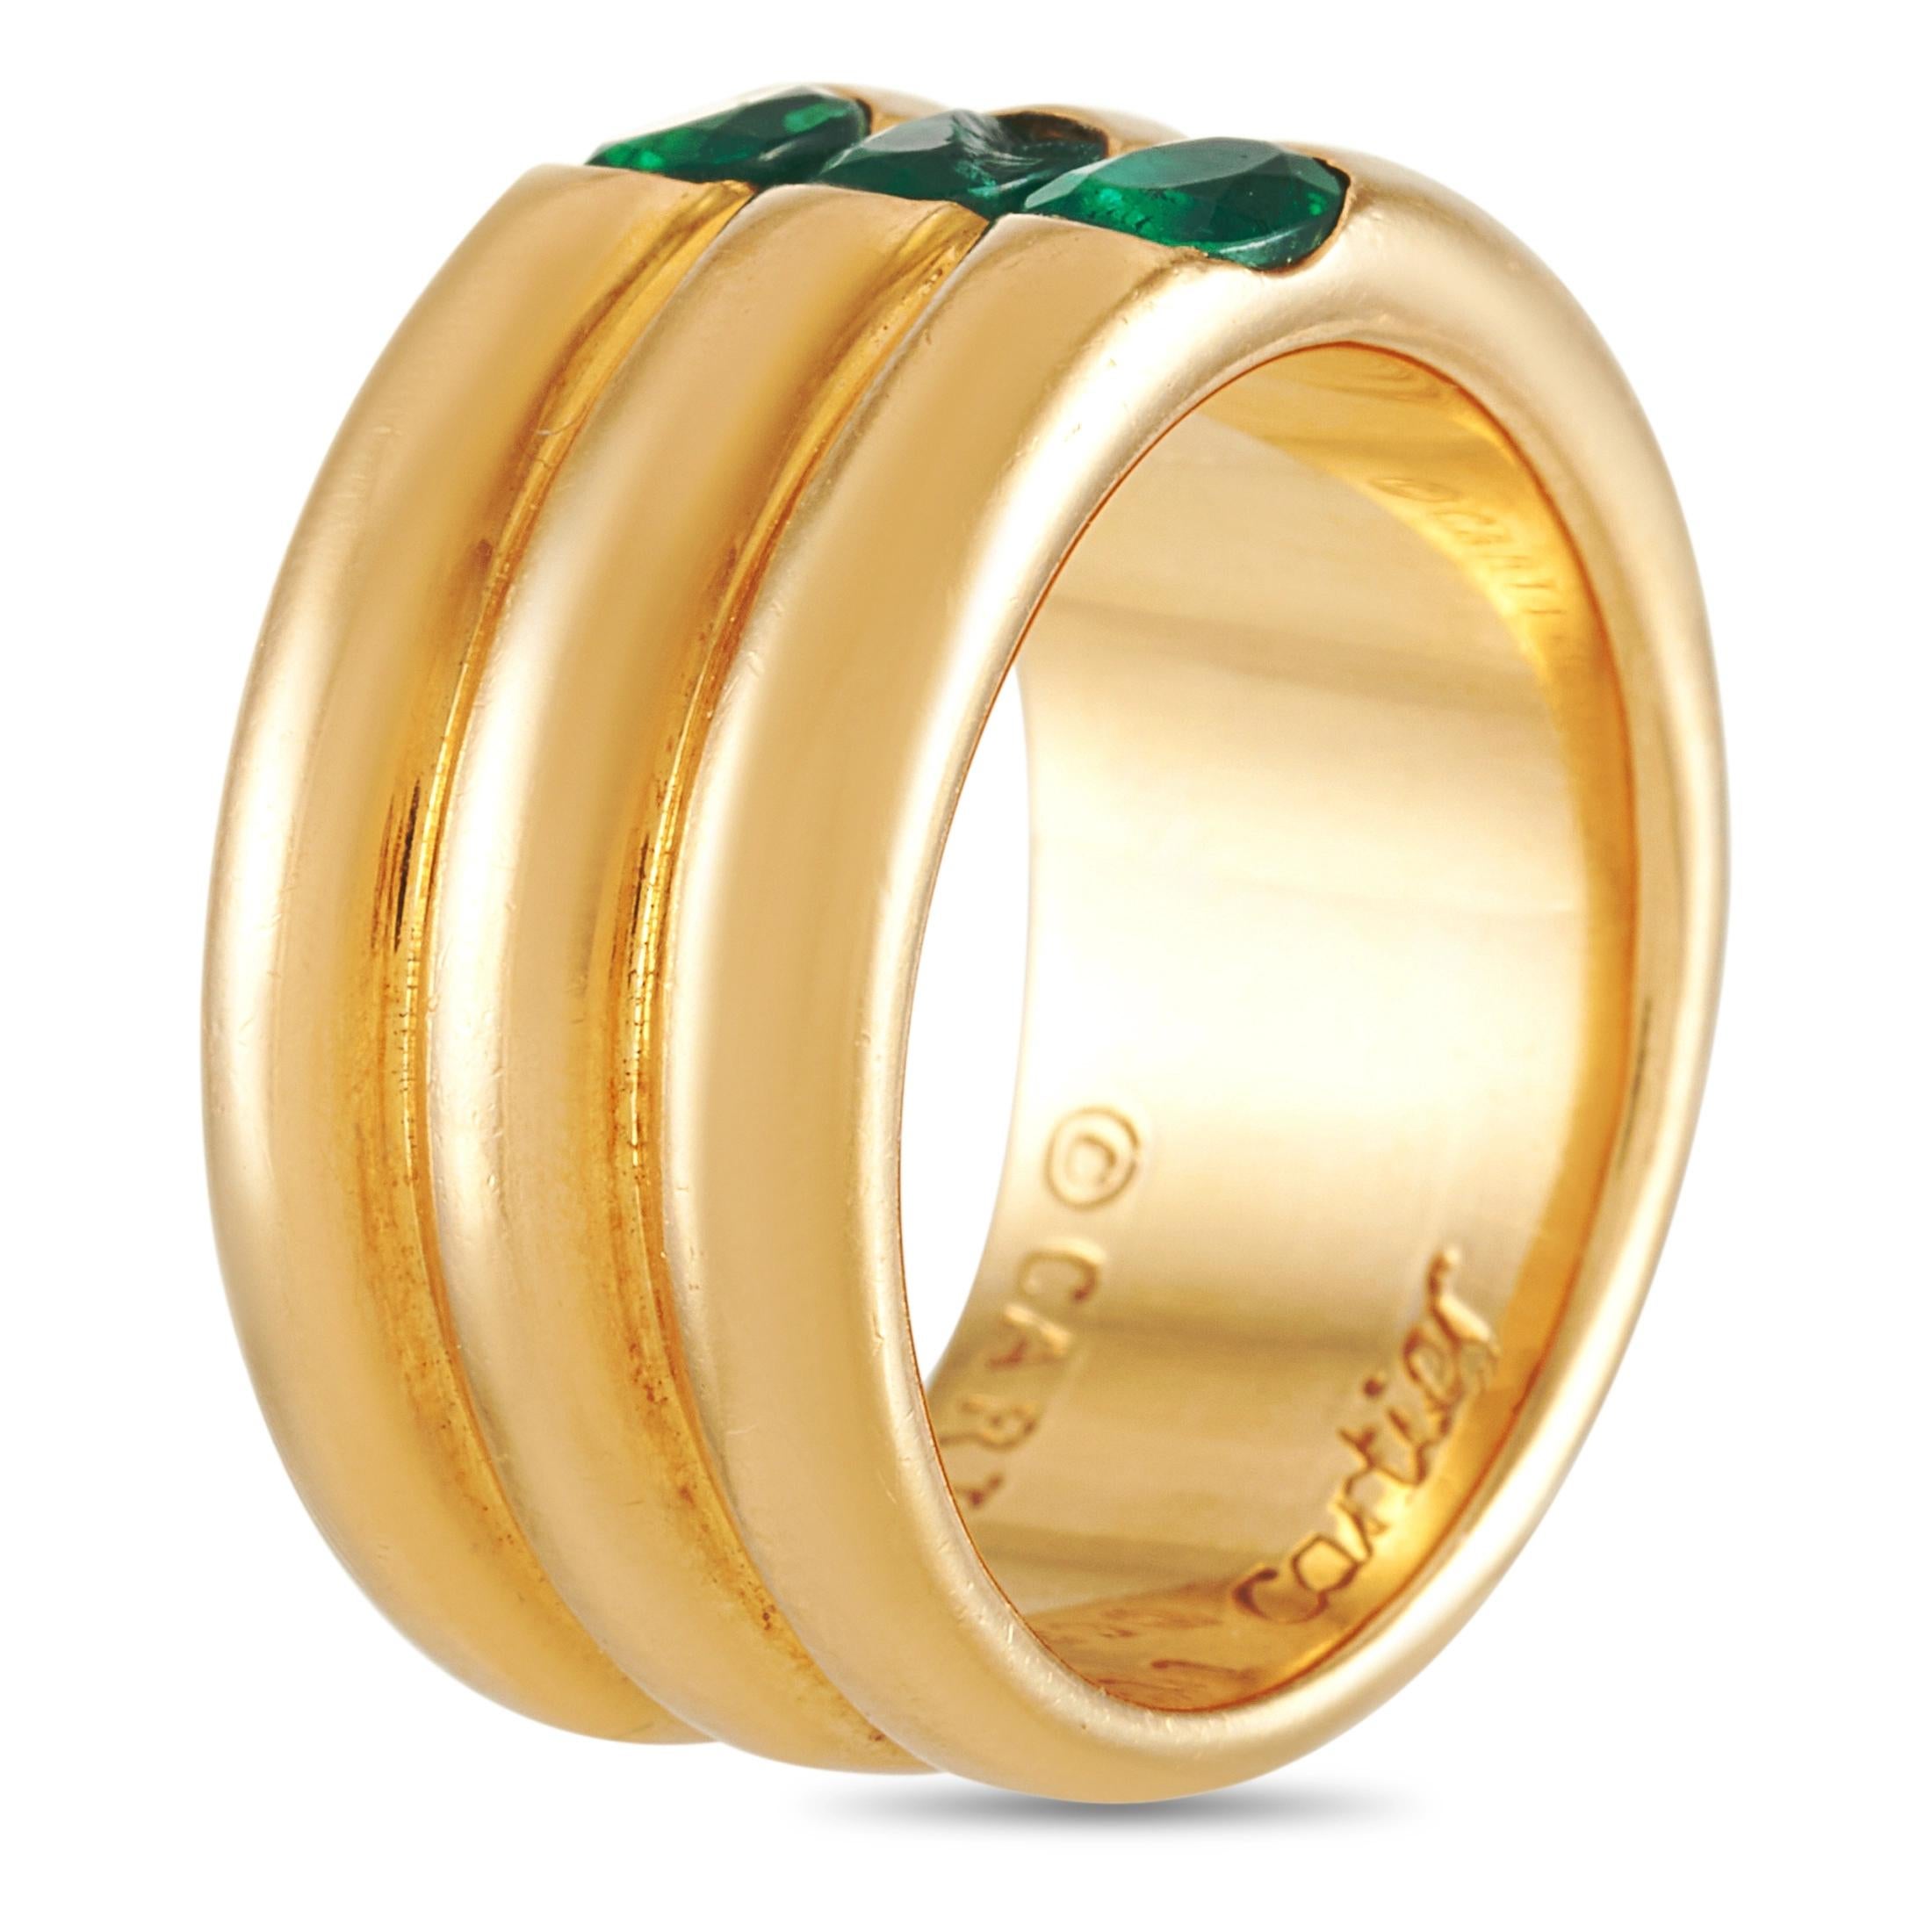 The Cartier “Eclipse” ring is made of 18K yellow gold and embellished with emeralds. The ring weighs 15.9 grams and boasts band thickness of 10 mm, while top dimensions measure 10 by 4 mm.
 
 This jewelry piece is offered in estate condition and